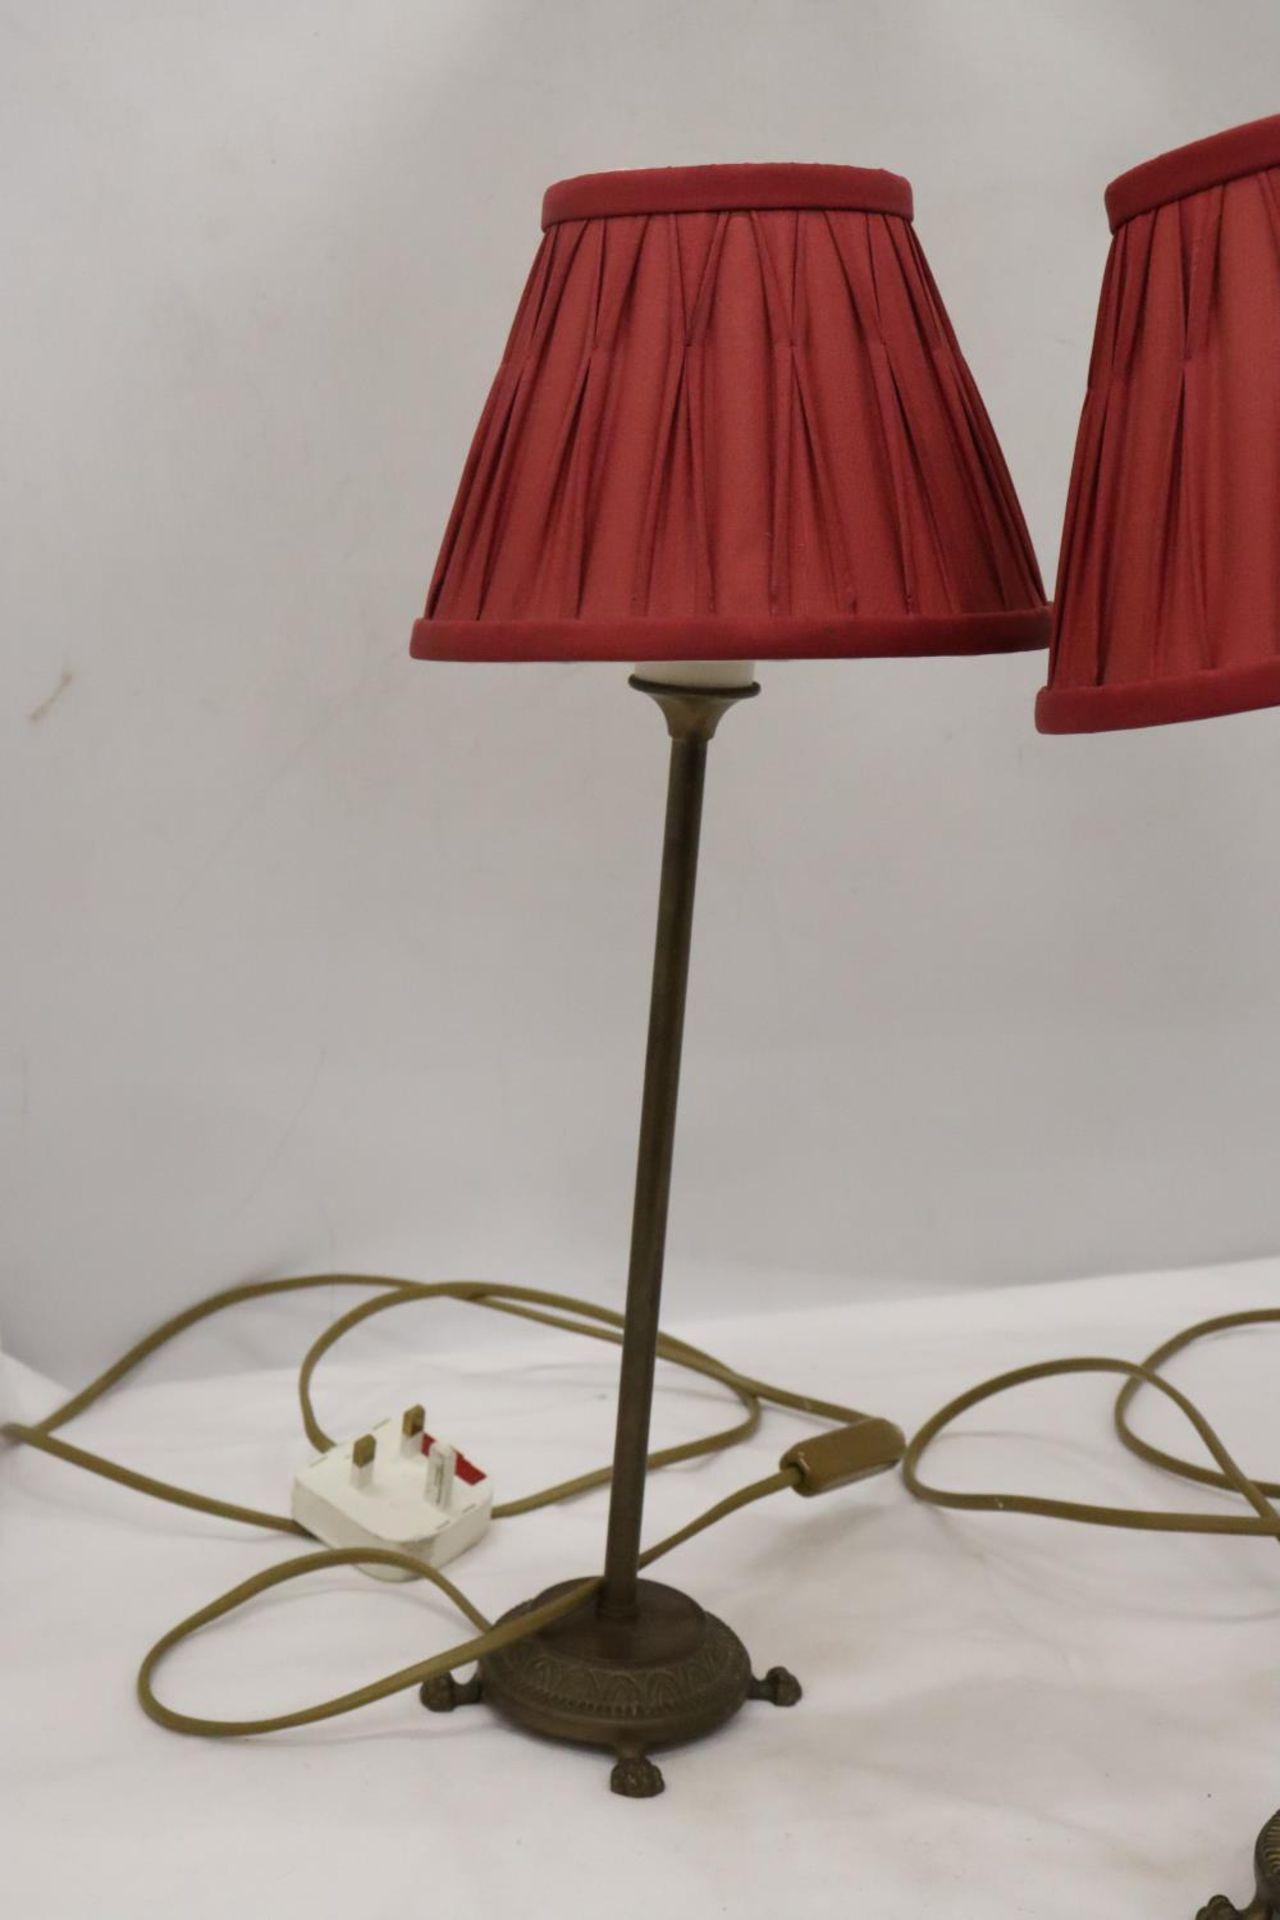 A PAIR OF LAMPS WITH PLEATED SHADES AND BRASS STANDS - Image 5 of 6